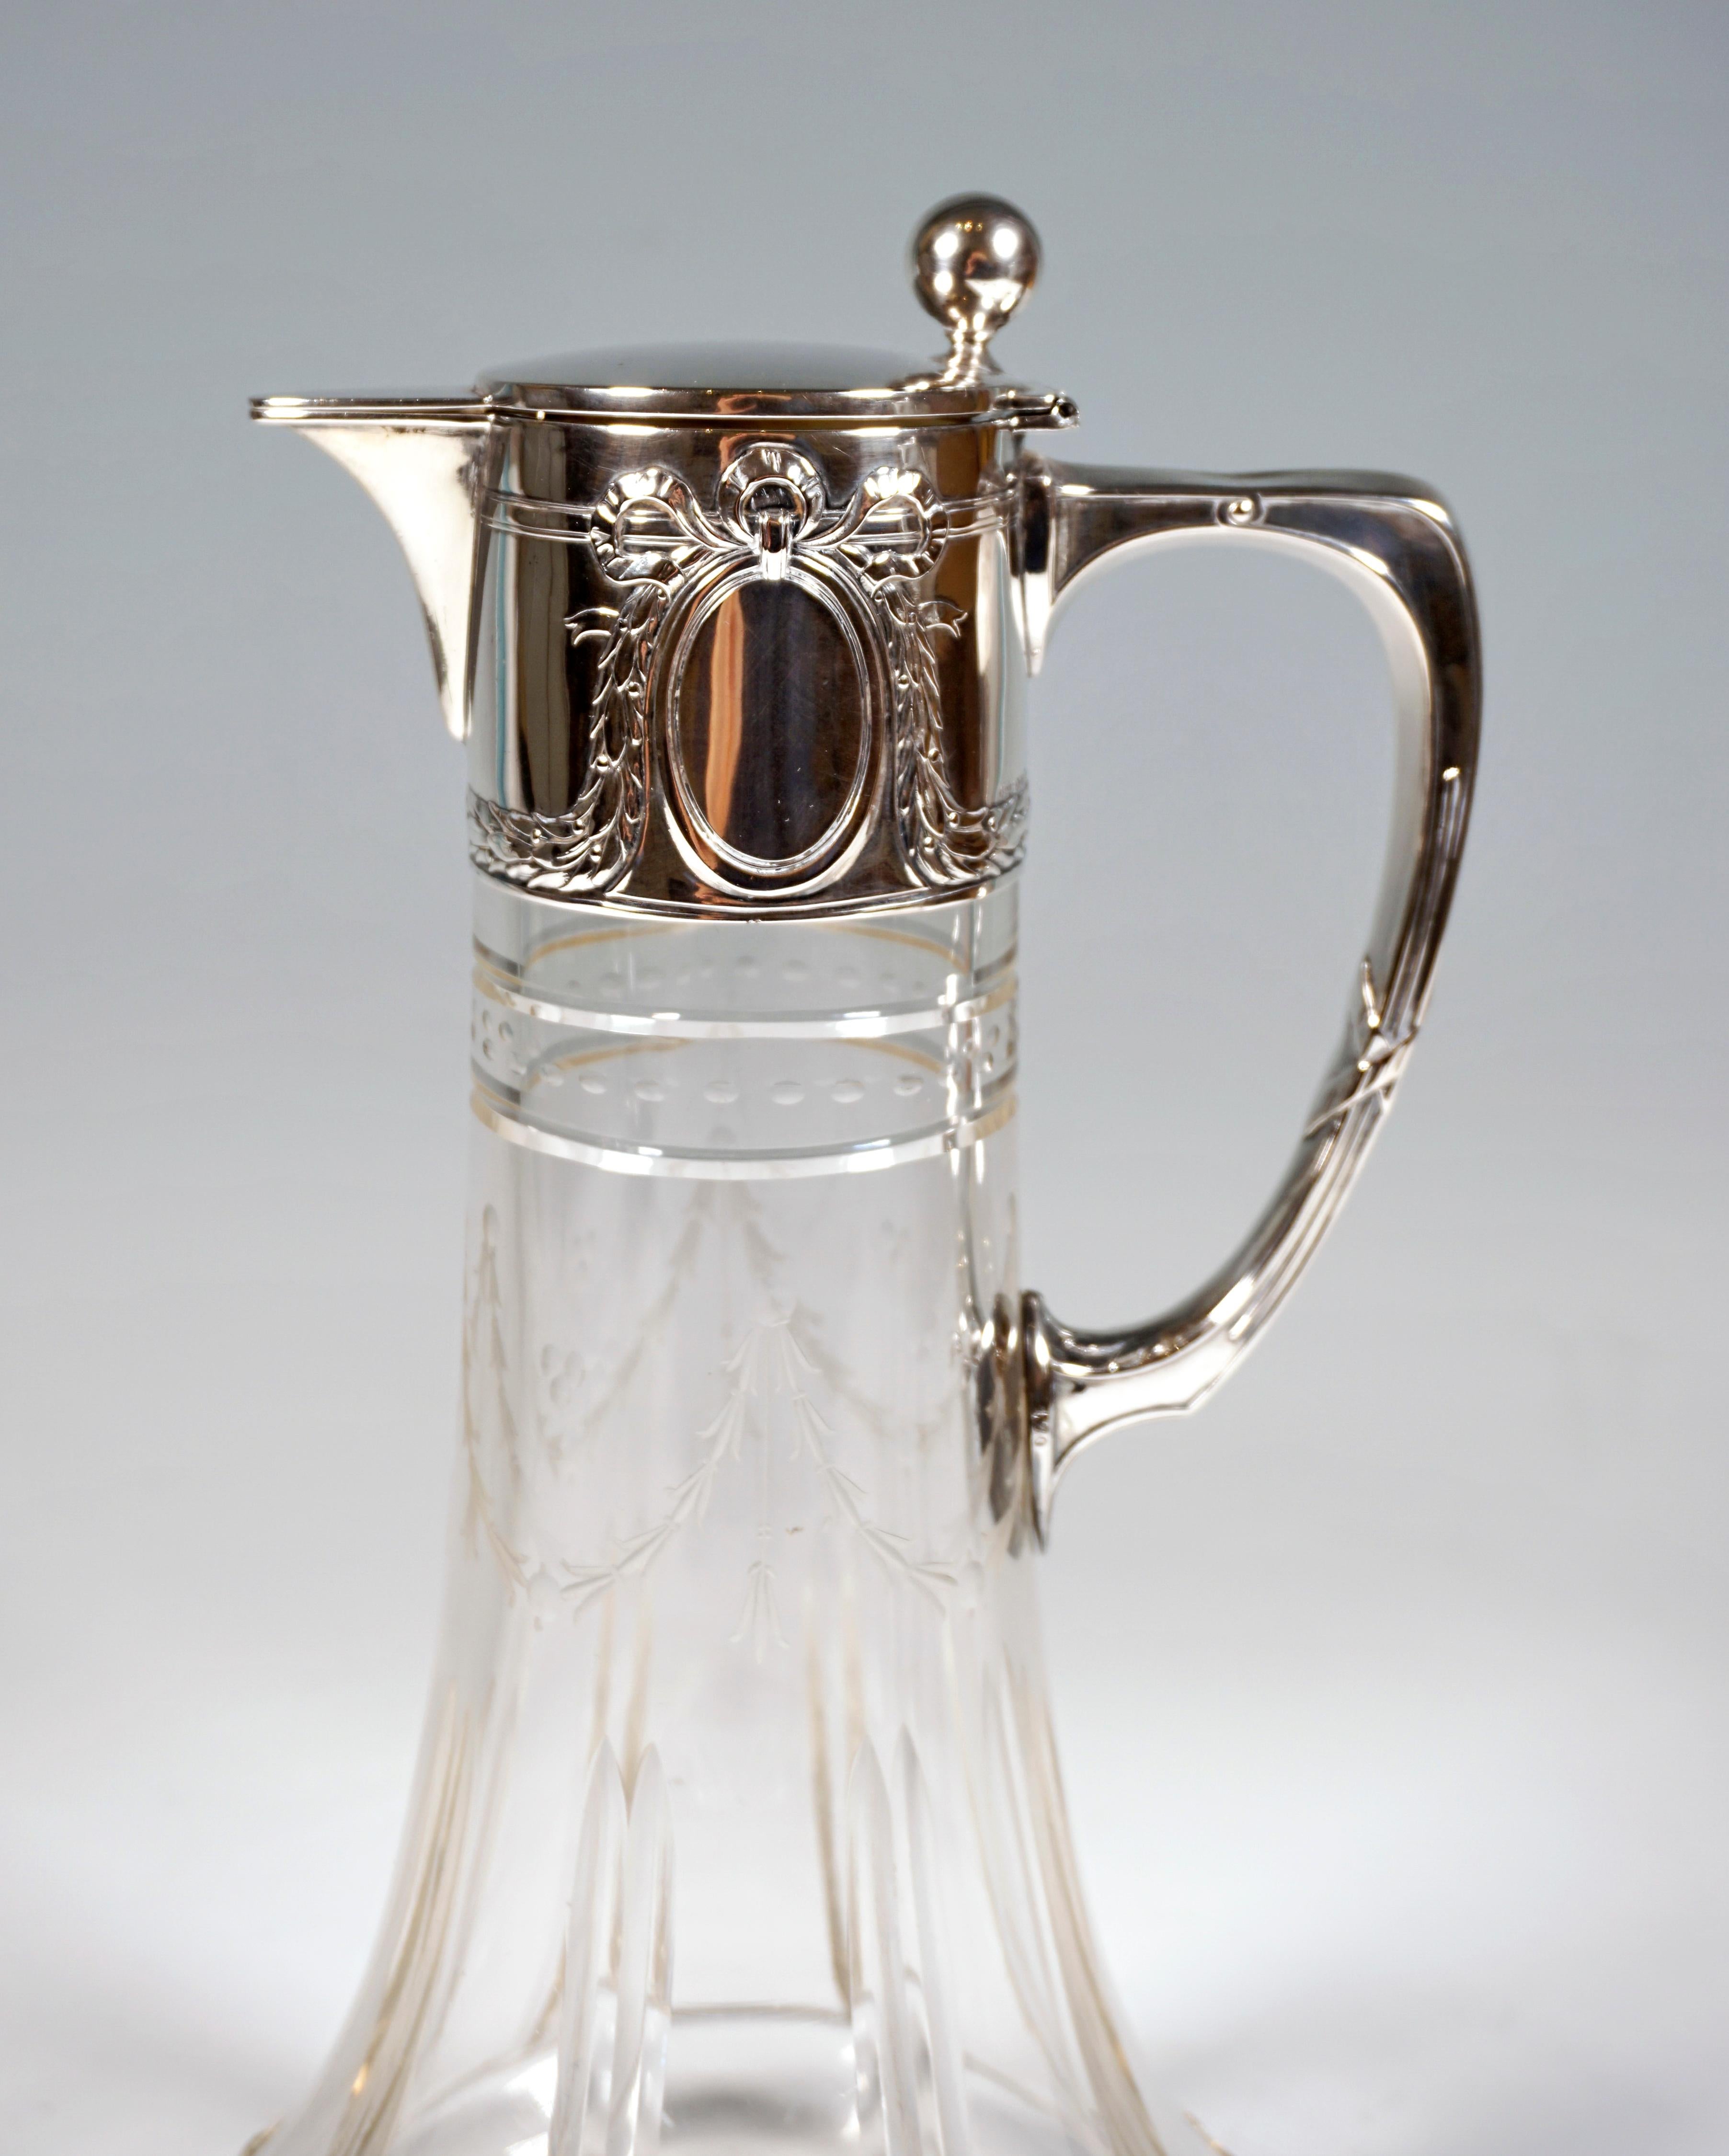 Early 20th Century Pair of Art Nouveau Glass Decanter with Silver Fittings, Wilhelm Binder, Germany